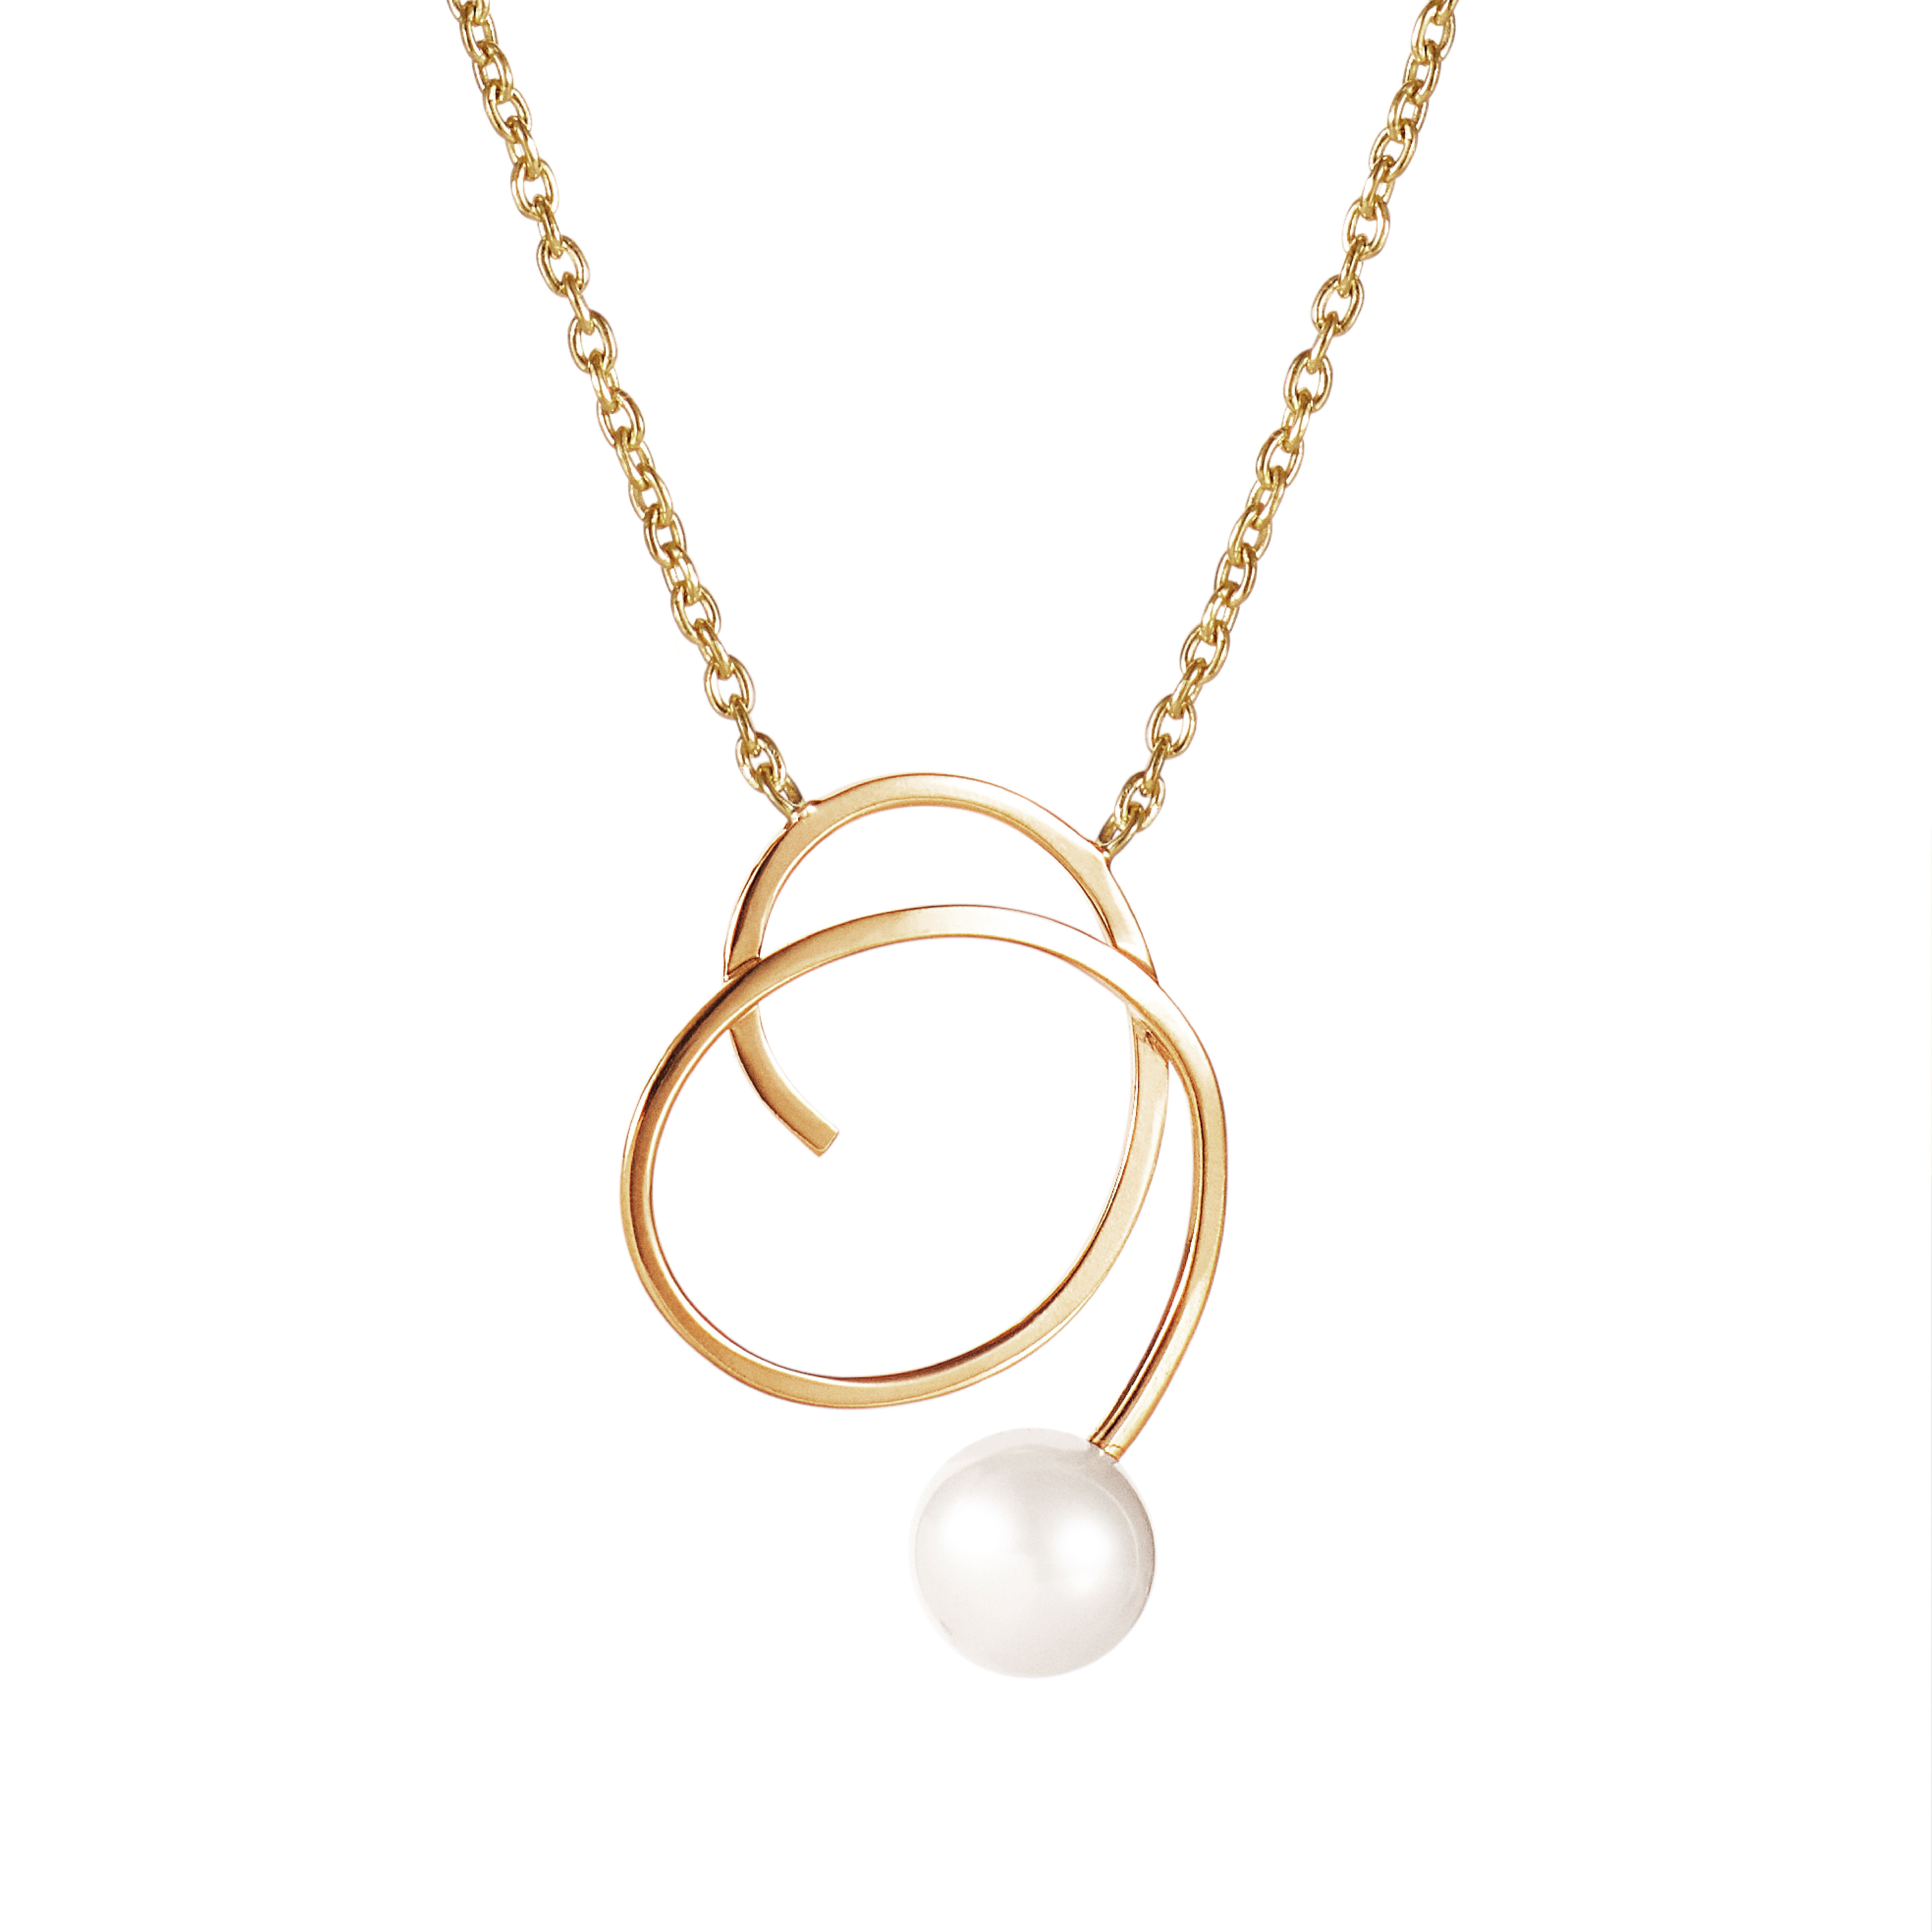 Efva Attling Little Curly Pearly Necklace 42/45 CM - GULD